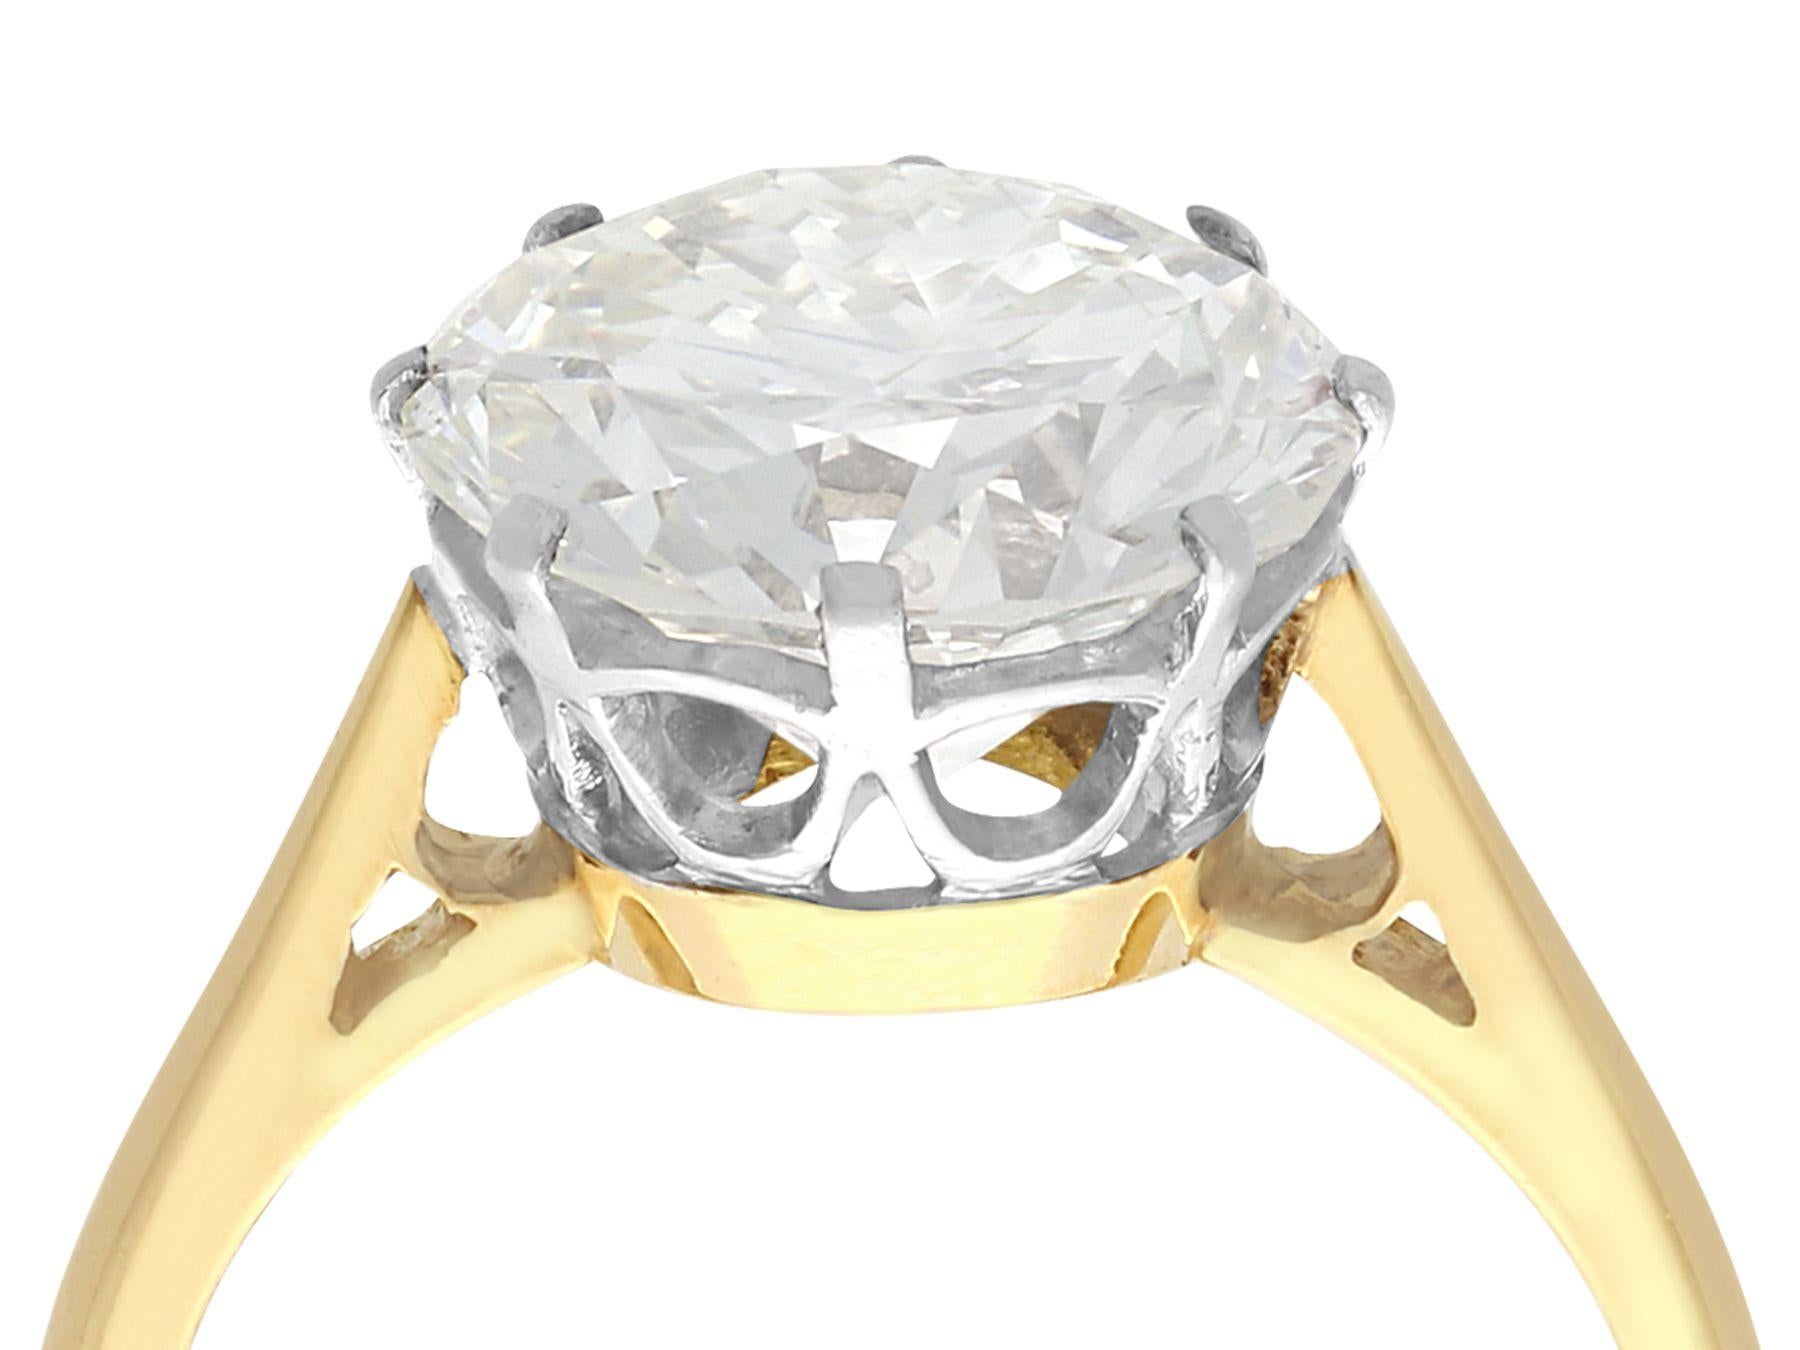 A stunning, fine and impressive vintage 3.93 carat diamond and contemporary 18 karat yellow gold, 18 karat white gold set solitaire ring; part of our diverse jewelry and estate jewelry collections

This stunning contemporary diamond solitaire ring